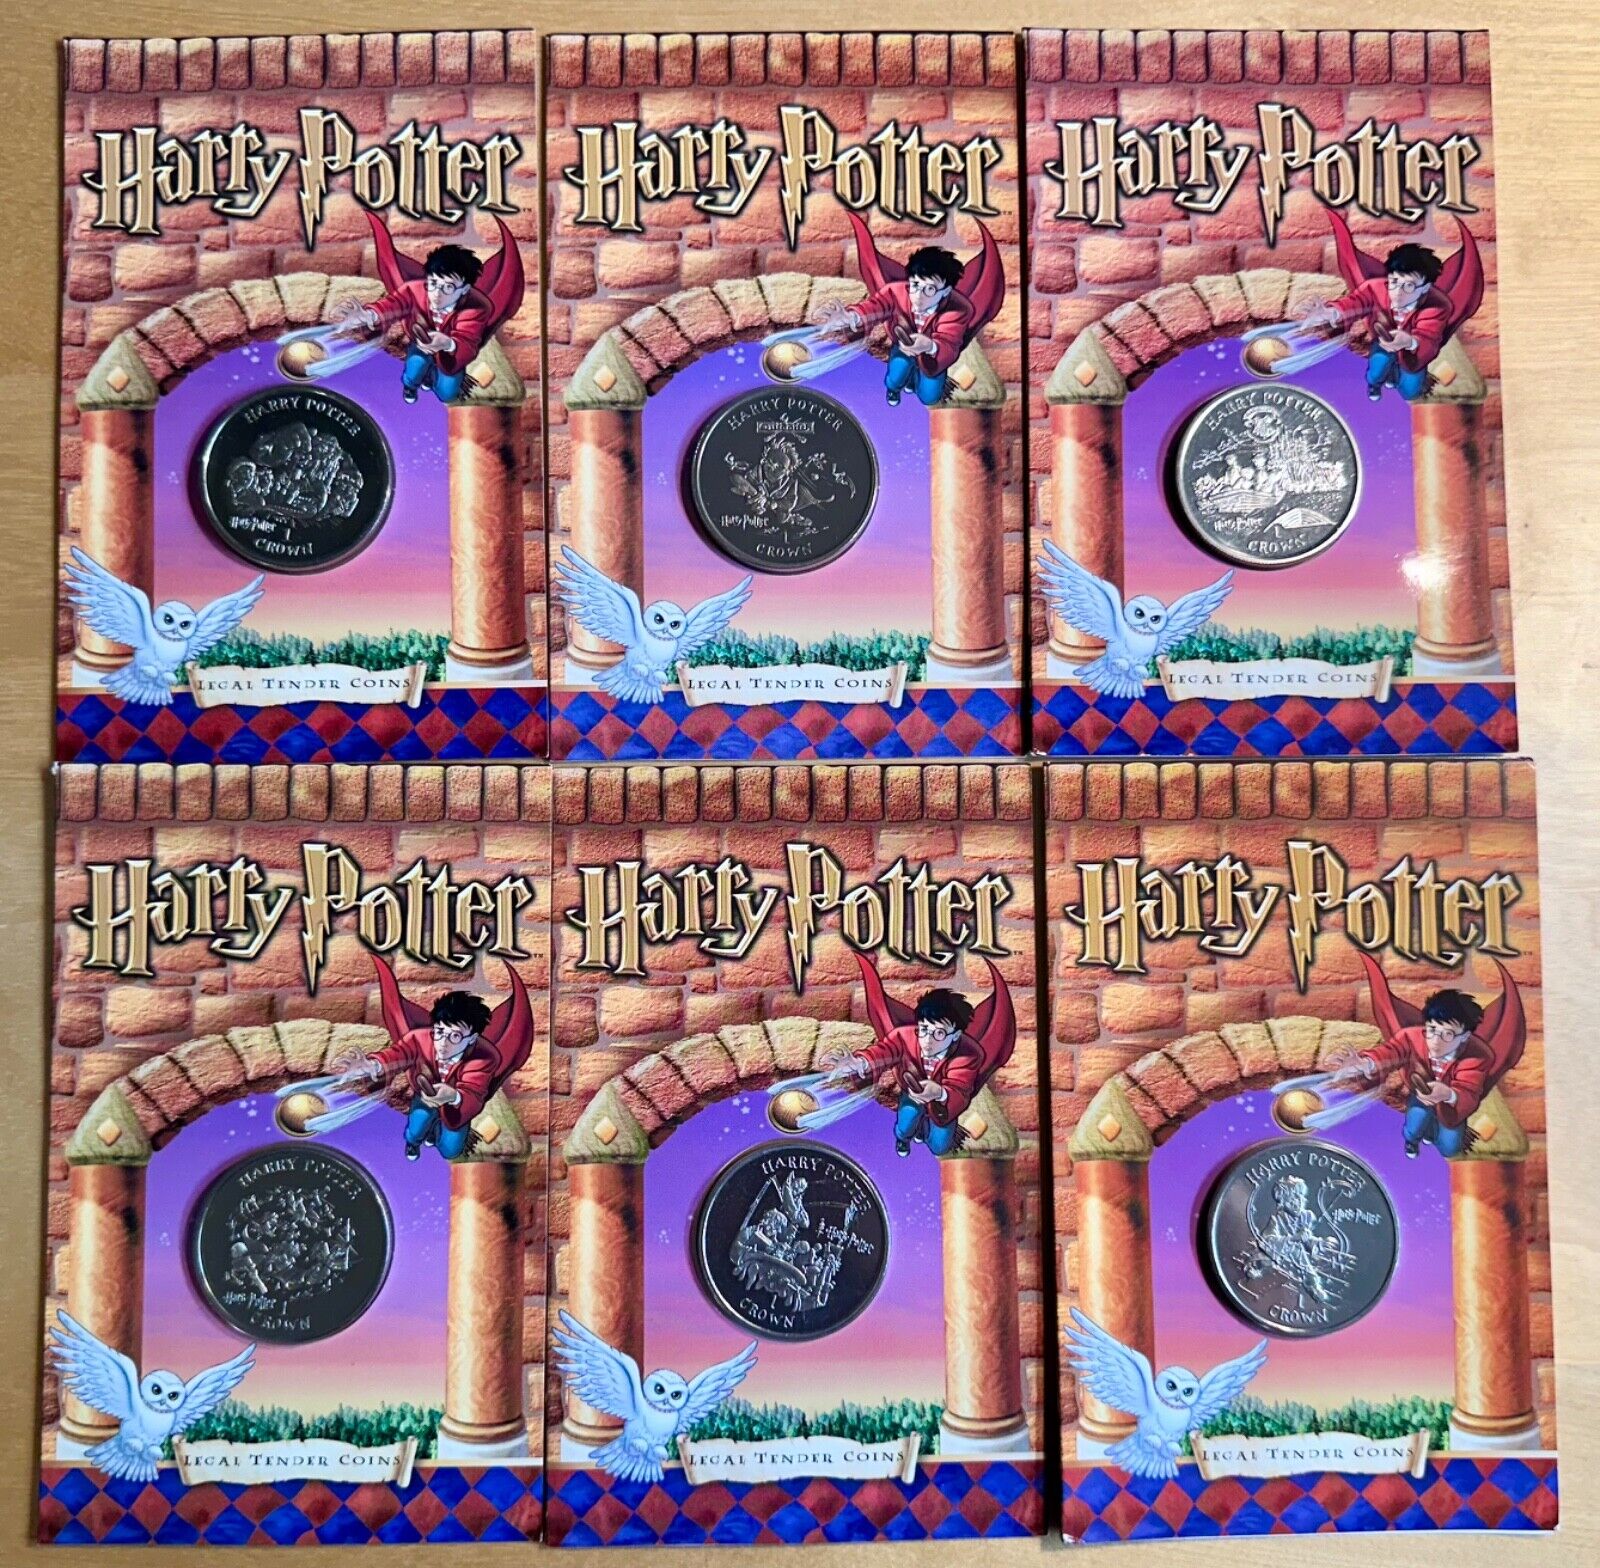 Harry Potter & the Philosopher's Stone Pobjoy Isle of Man 1 Crown Coin Set of 6